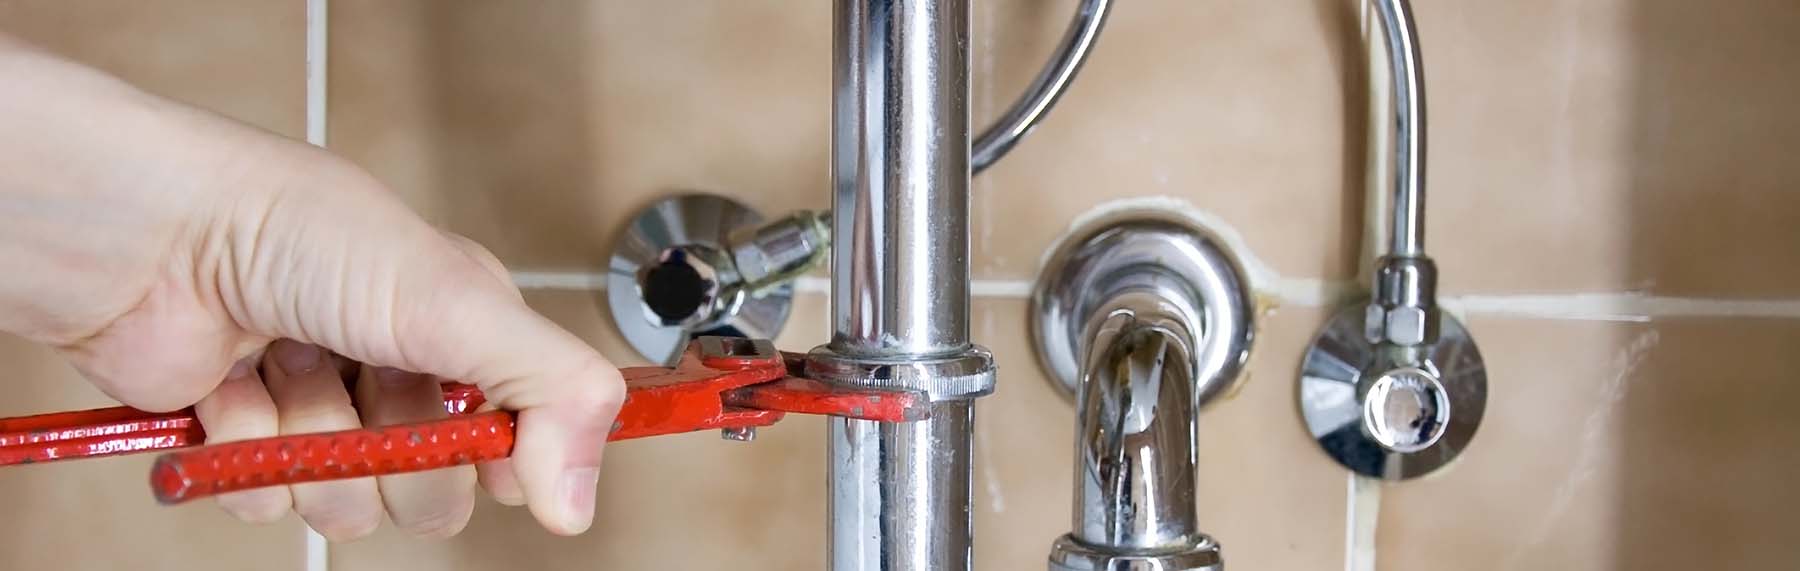 Plumber holding wrench fixing pipe under bathroom sink